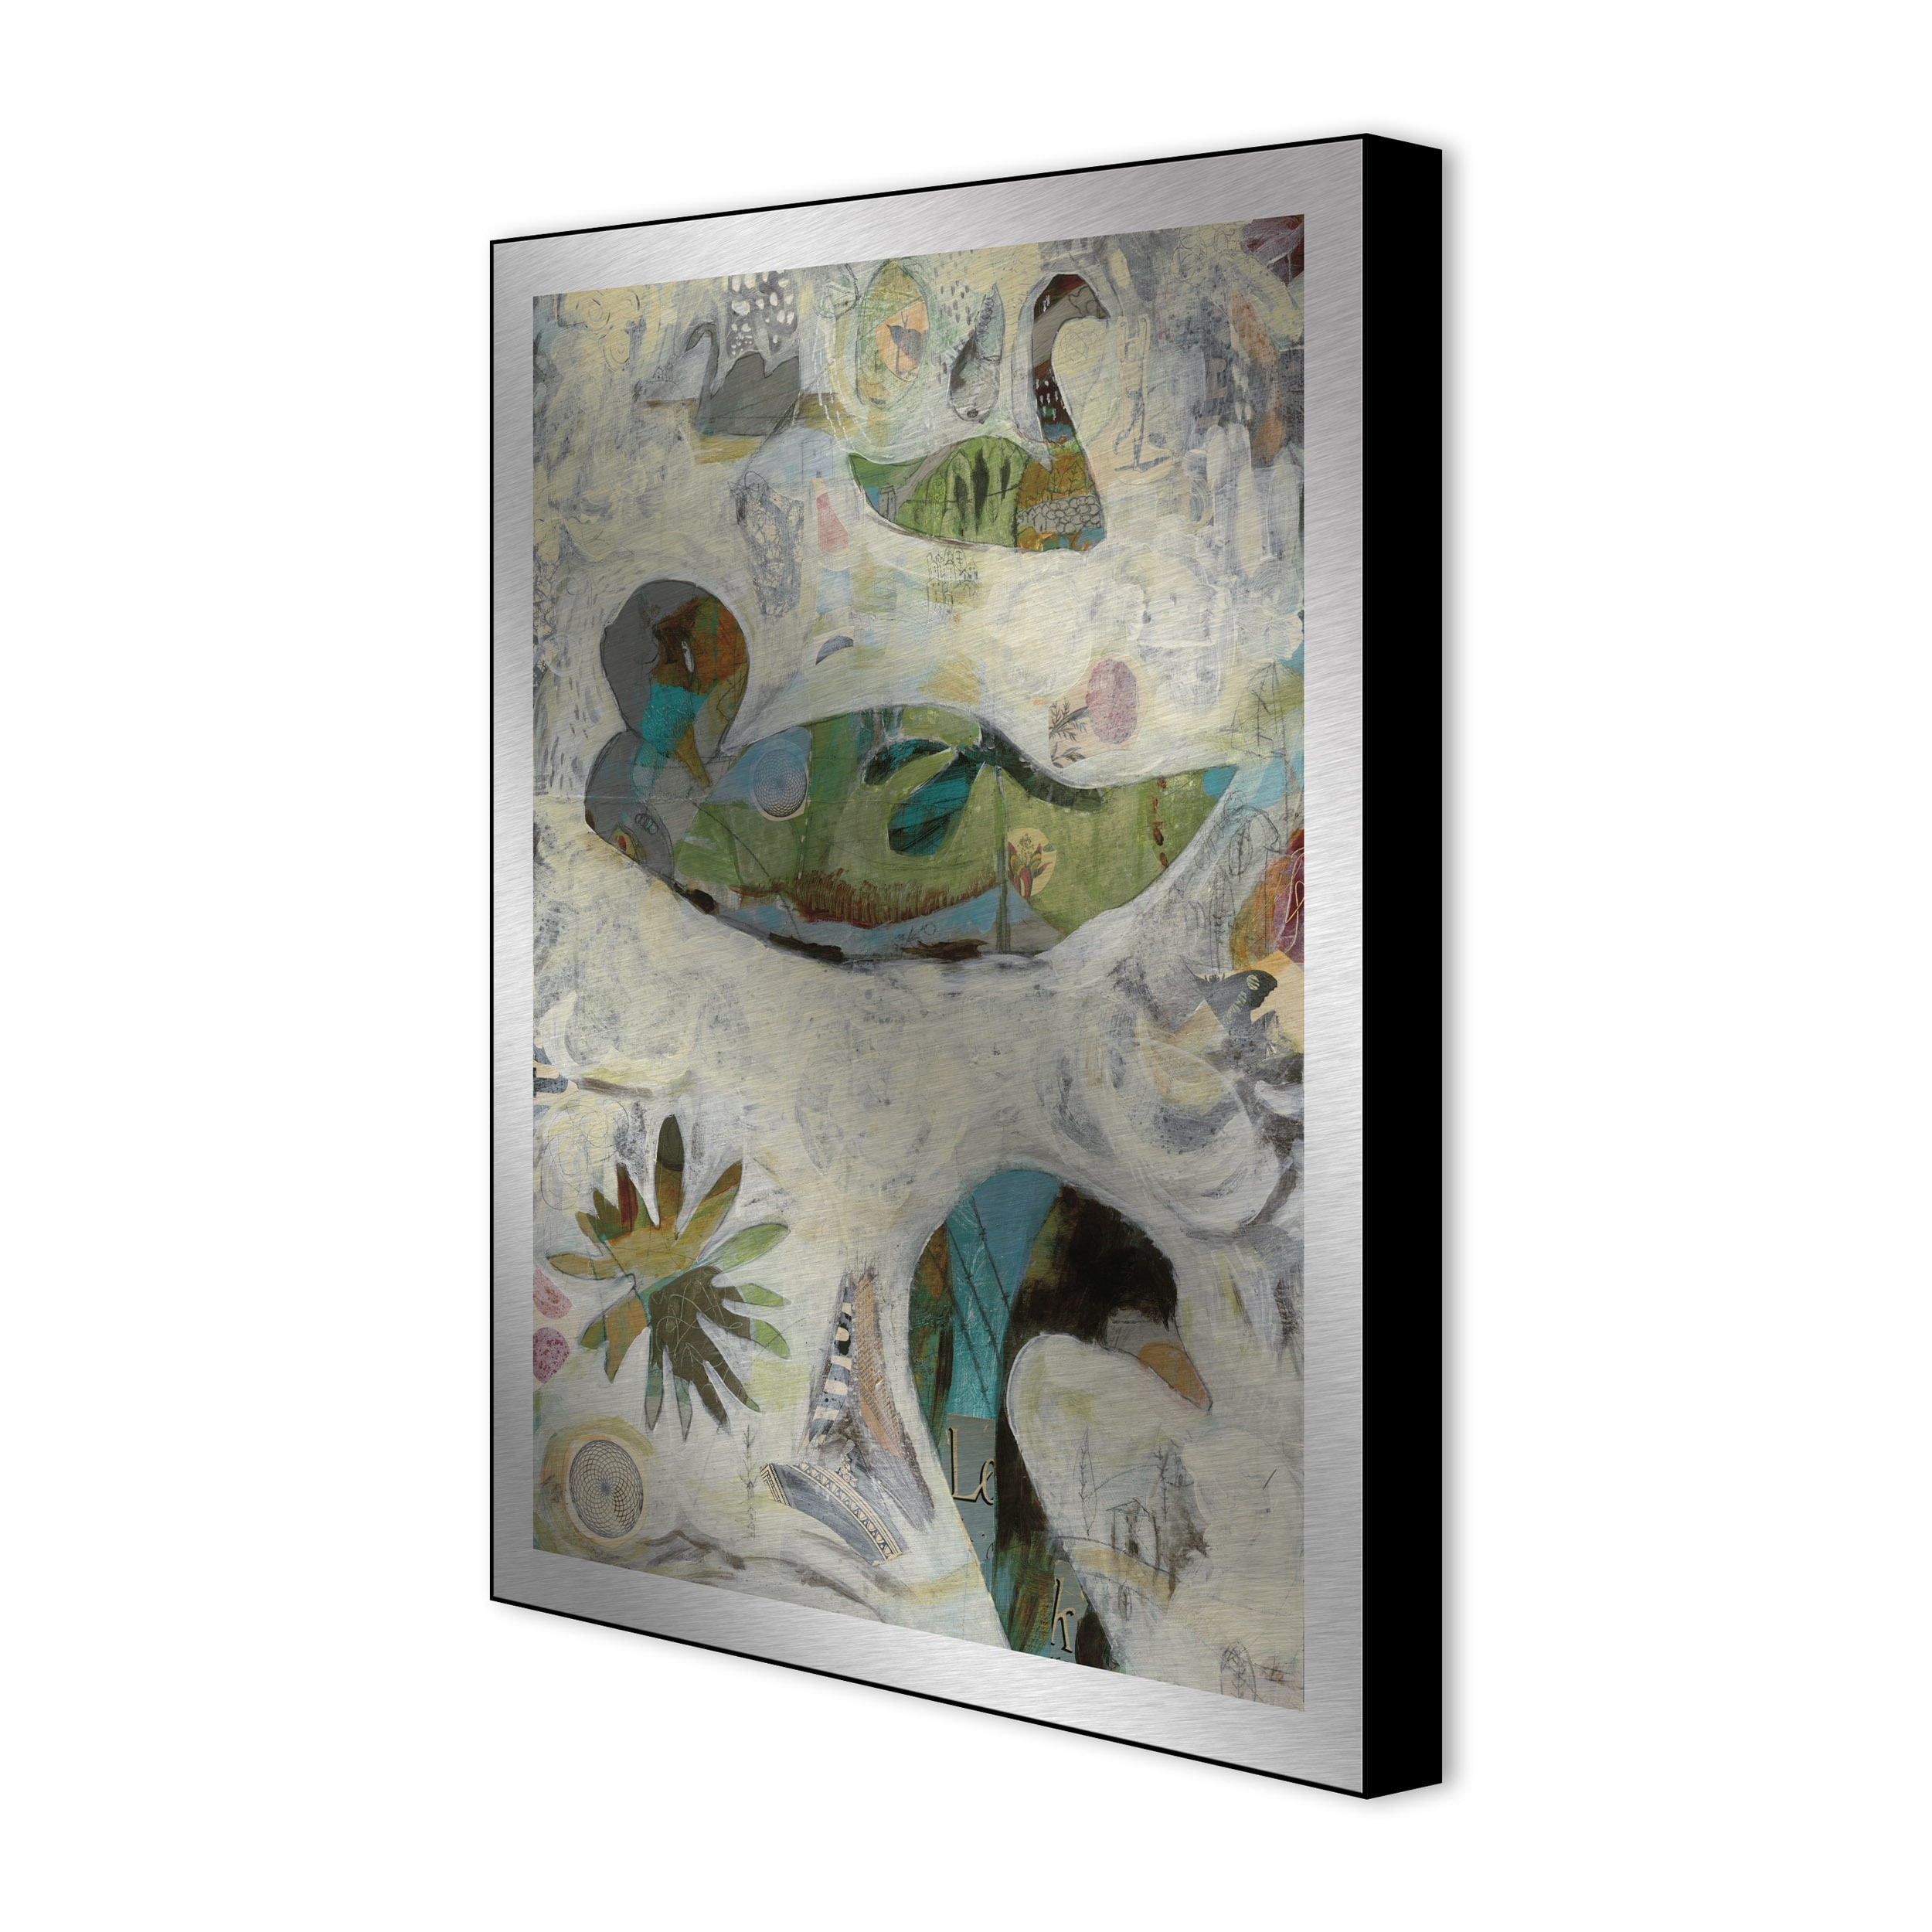 Judy Paul Pond Ii Framed Art On Metal (LargeSubject BirdsProduct Type Framed Metal ArtImage size 16 inches tall x 22 inches wide1 inch borderOuter dimensions 18 inches tall x 24 inches wide )